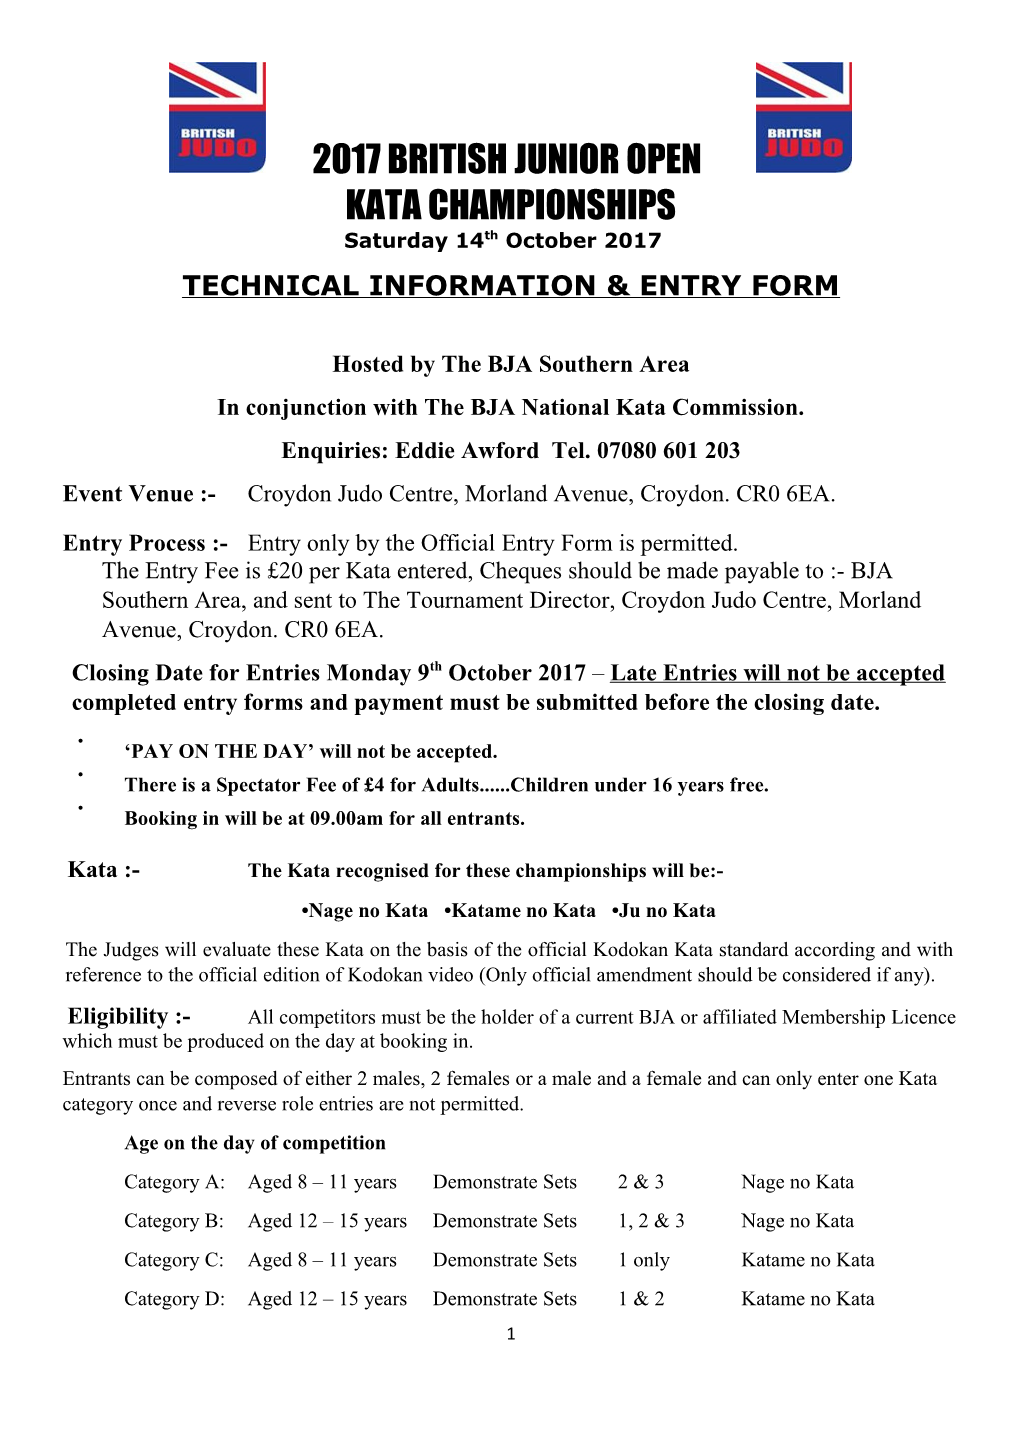 Technical Information & Entry Form